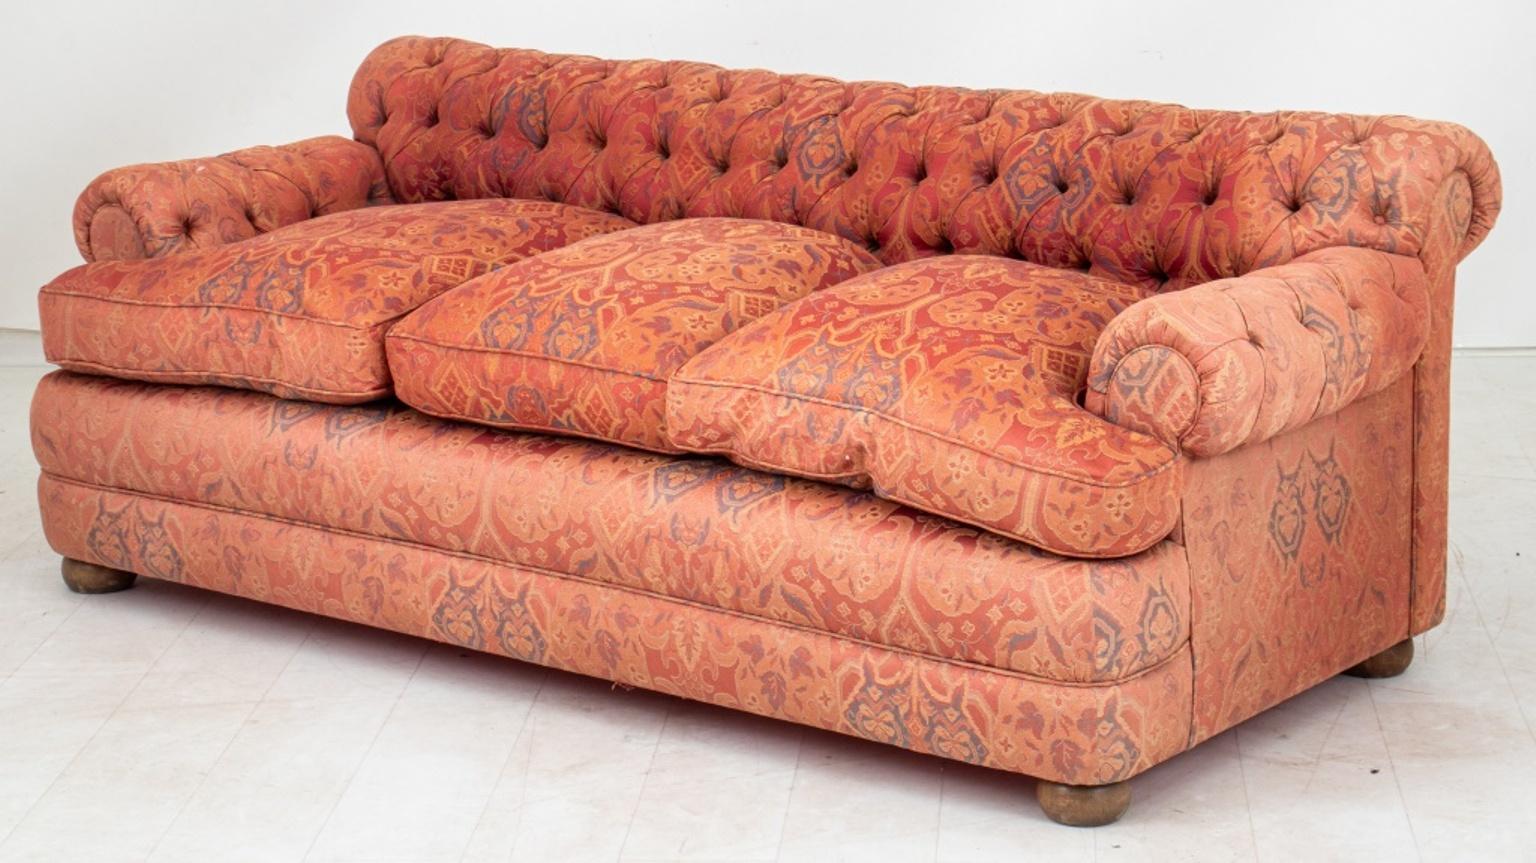 20th Century Paisley Upholstered Buttoned Chesterfield Sofa